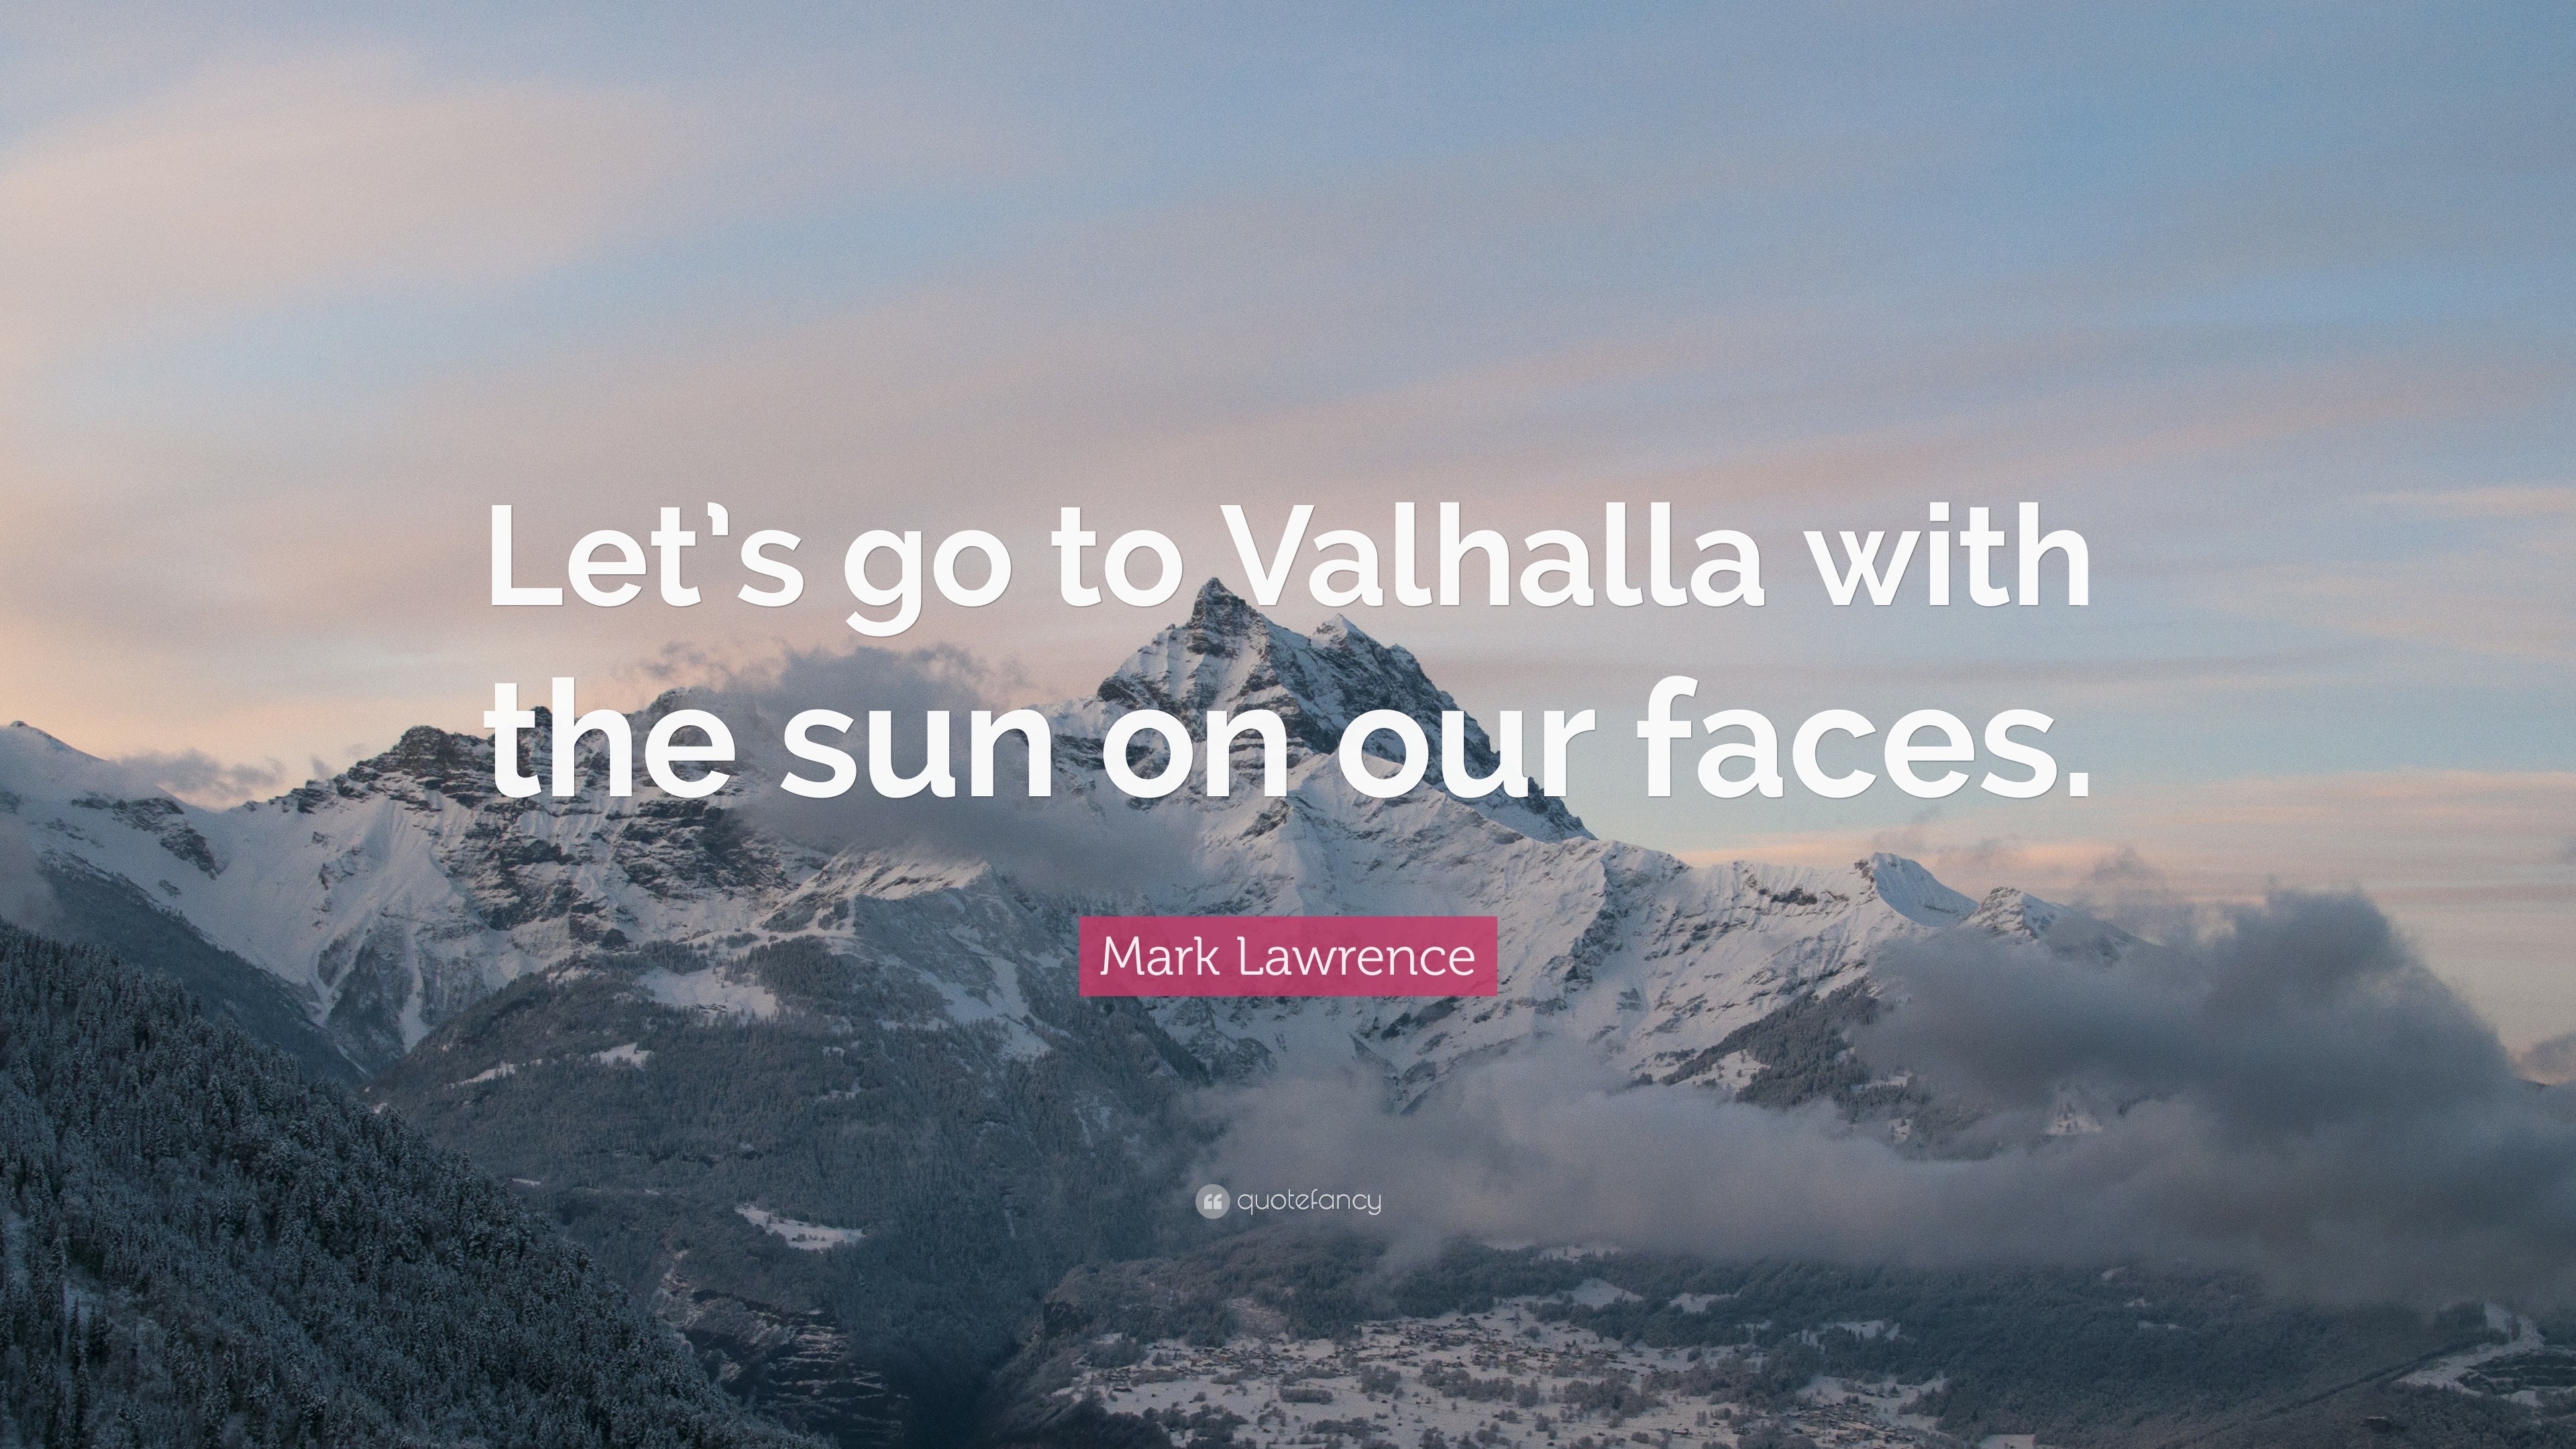 3840x2160 Mark Lawrence Quote: “Let's go to Valhalla with the sun on our faces.